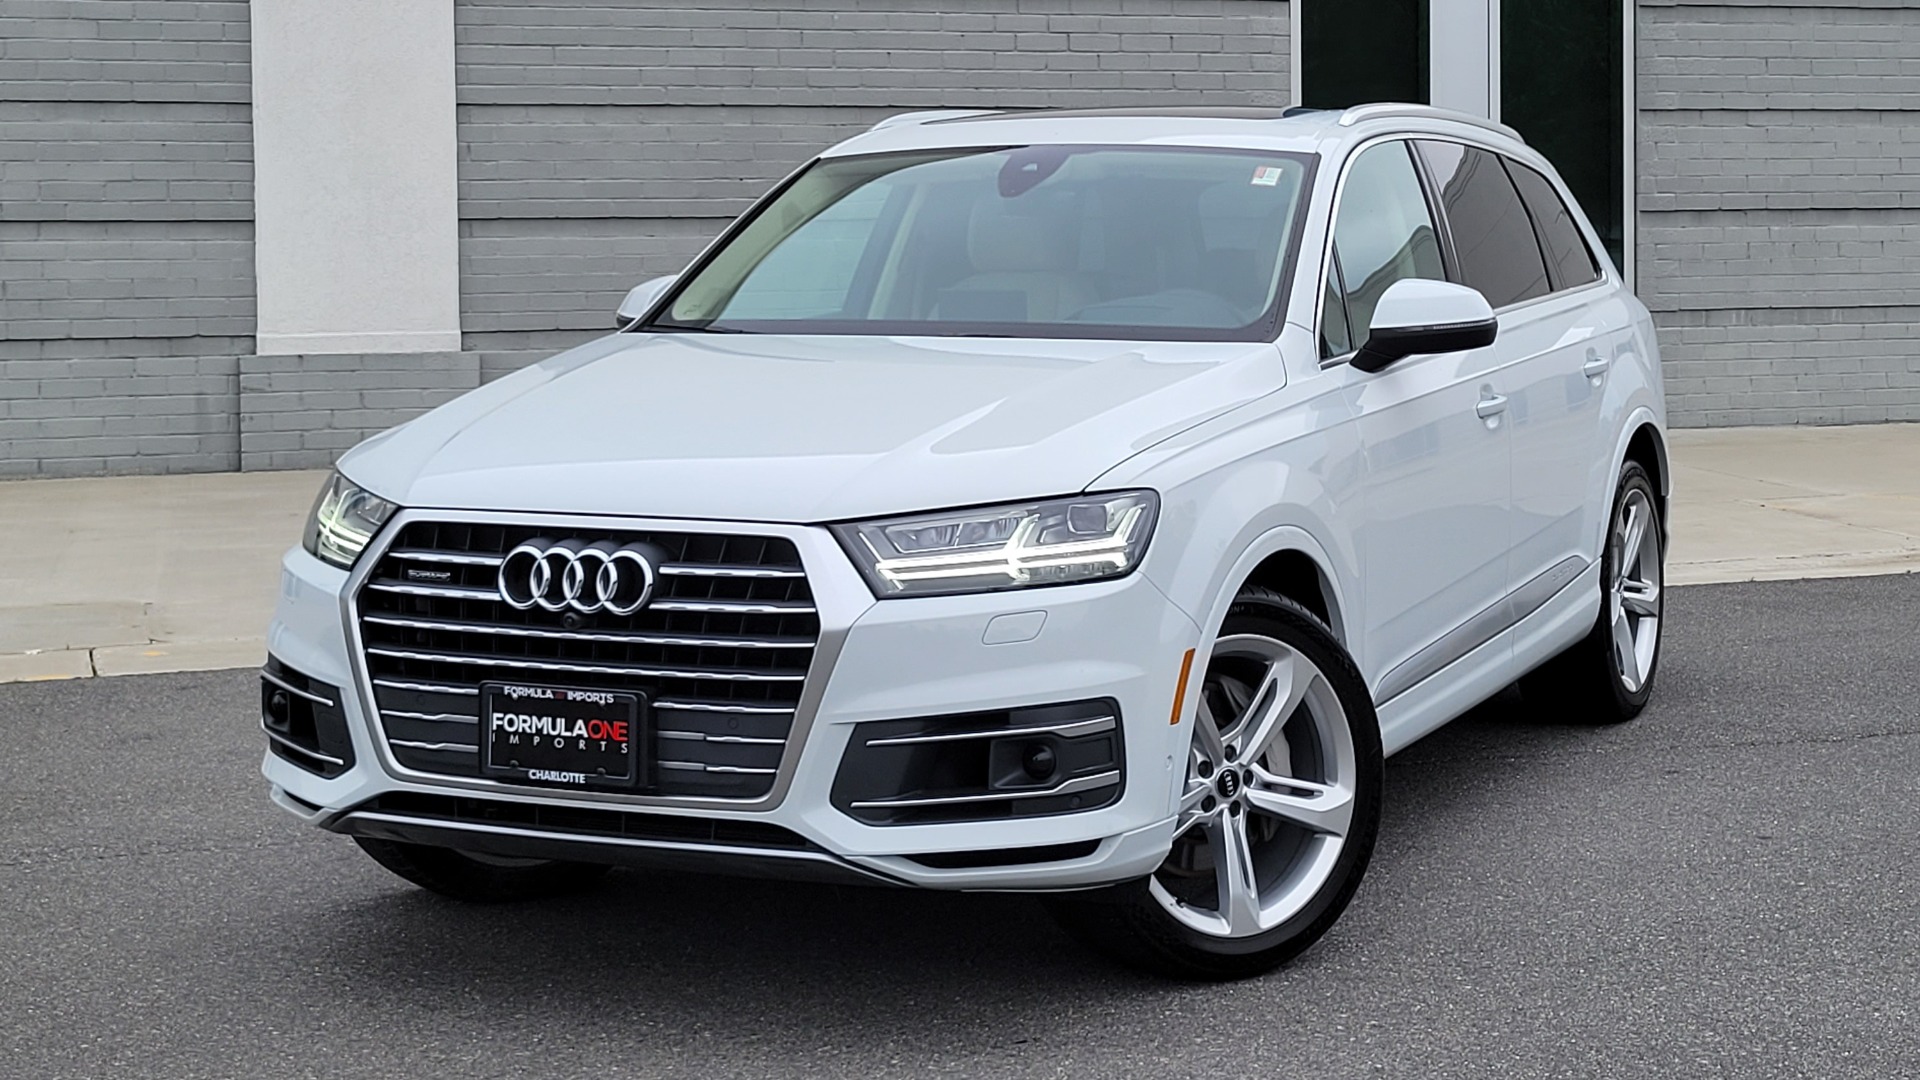 Used 2019 Audi Q7 PRESTIGE / CONV PKG / BOSE / HUD / CLD WTHR / TOWING / REARVIEW for sale $50,295 at Formula Imports in Charlotte NC 28227 7